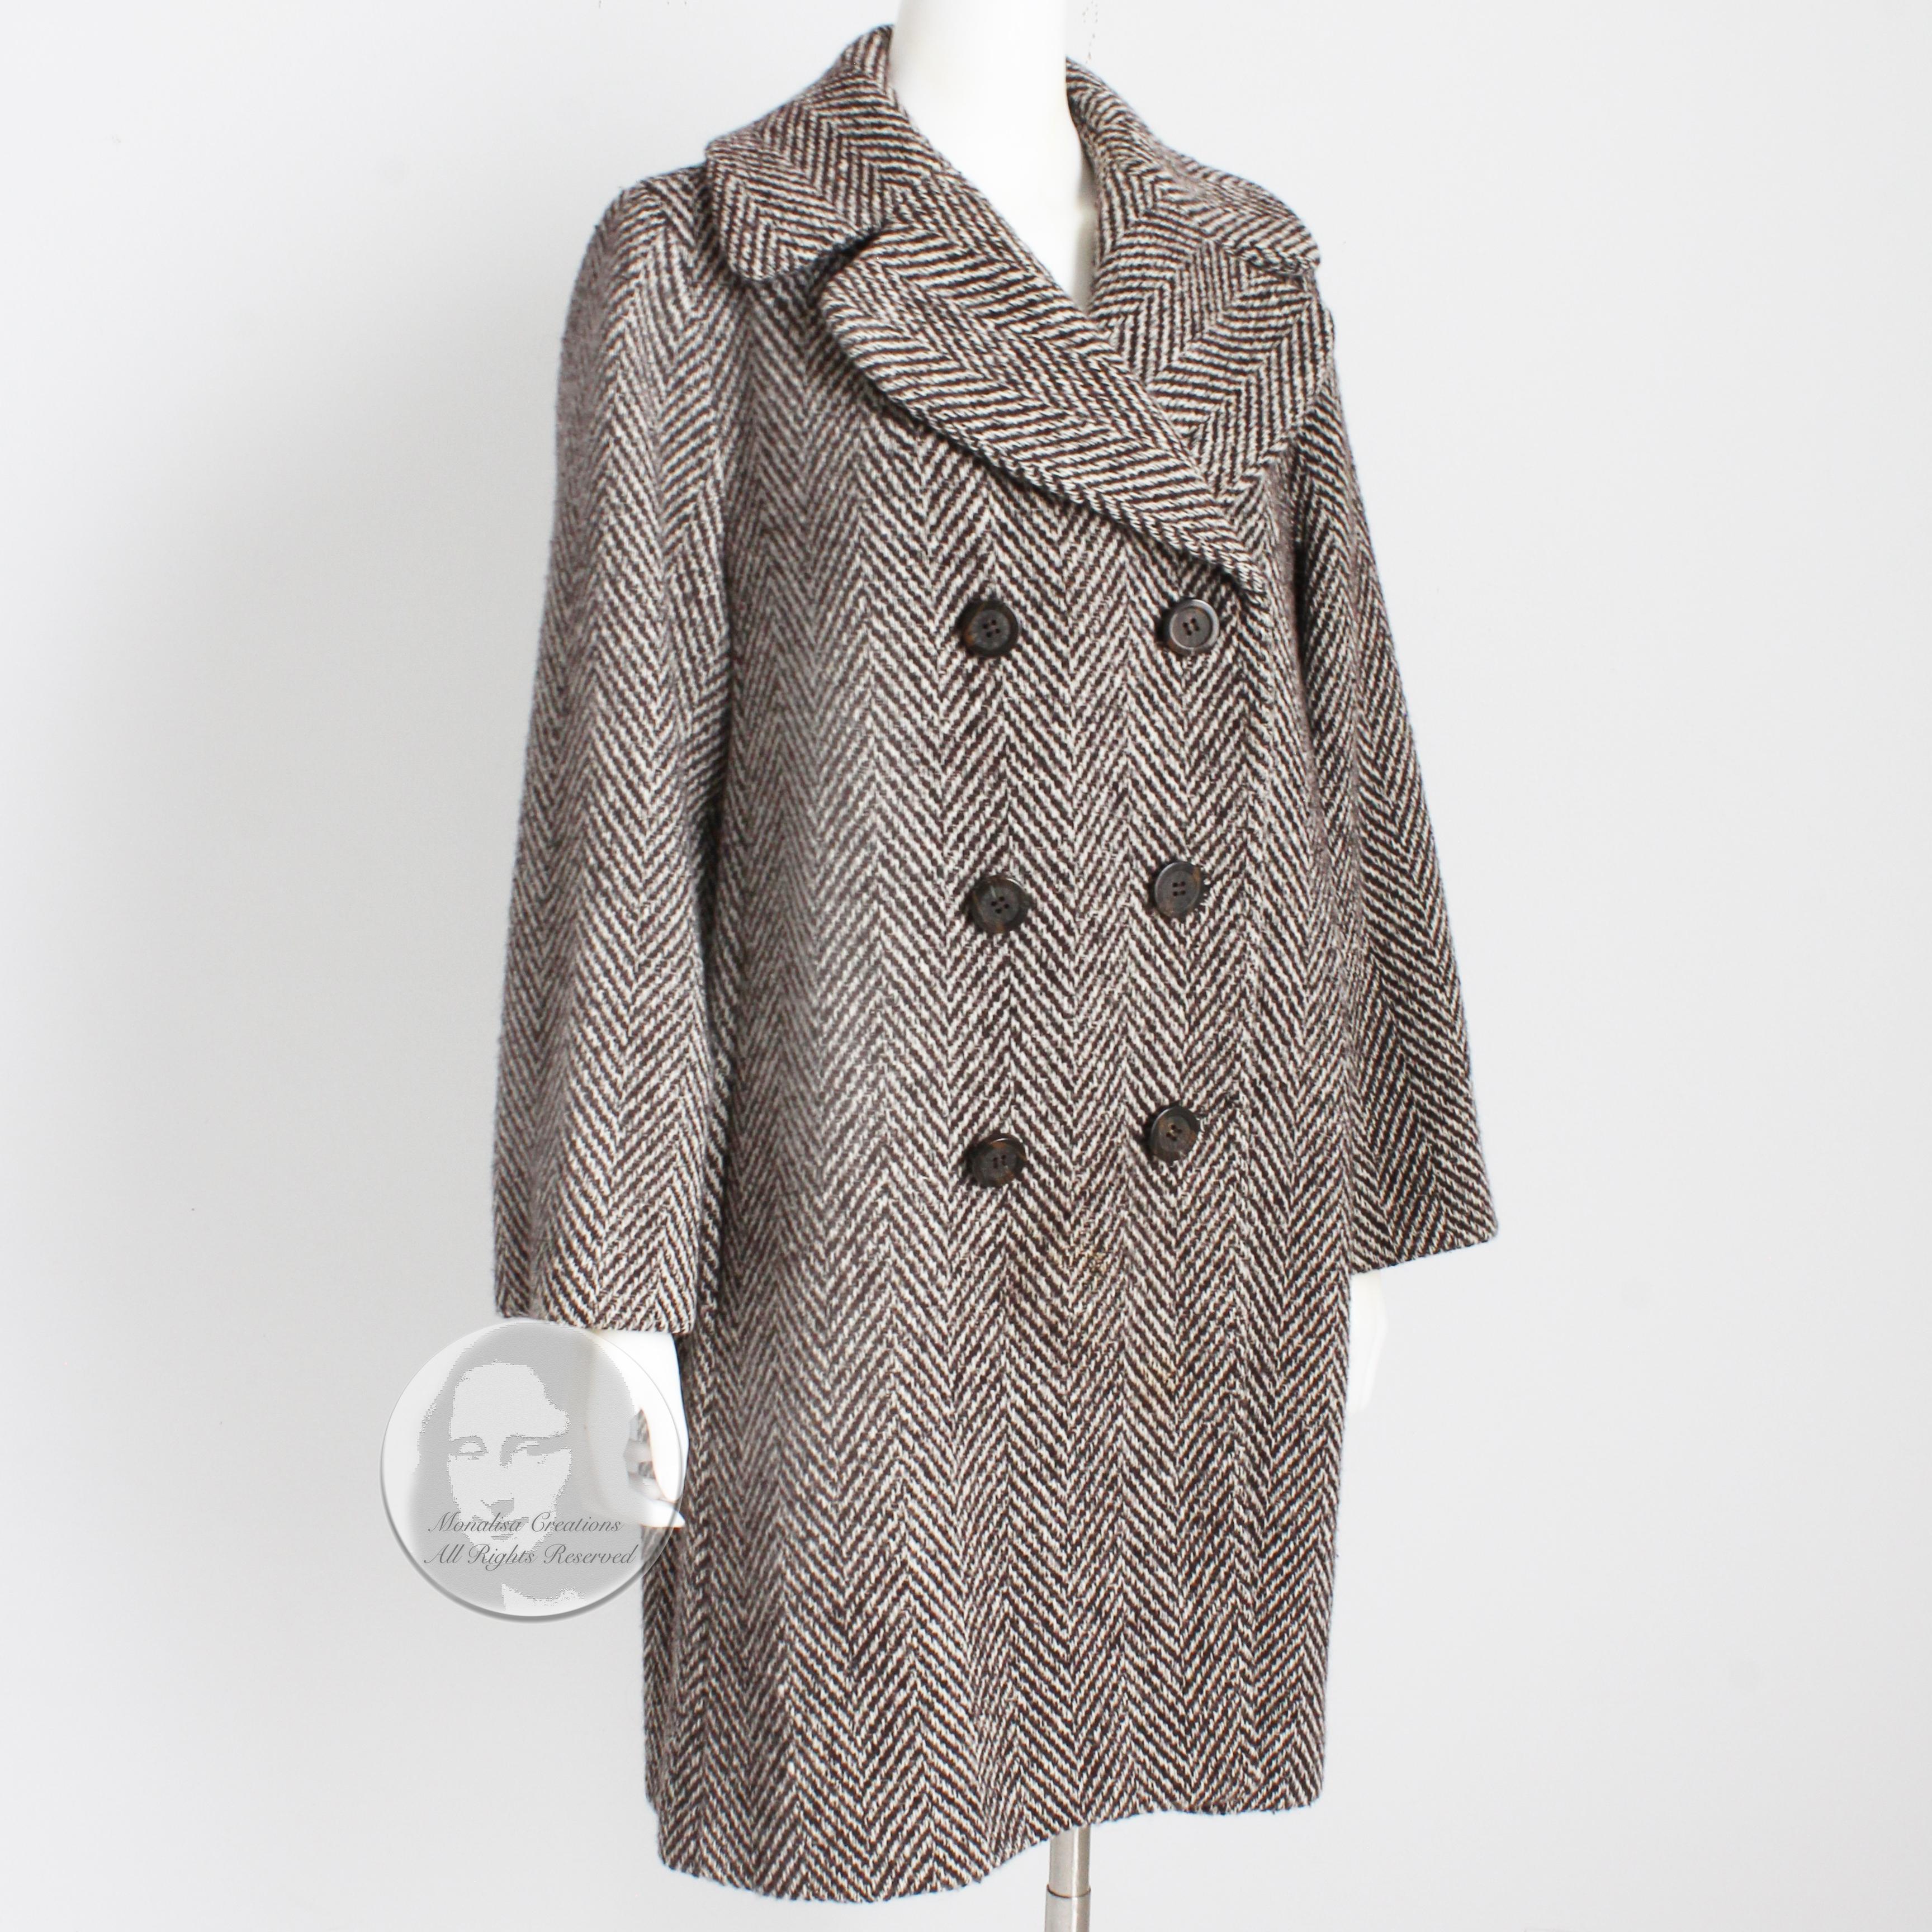 Here's a chic wool coat from Dolce & Gabbana, most likely made in the mid 2000s.  Made from a soft brown and cream white herringbone wool, it features double-breasted construction, side pockets, chunky buttons and is fully-lined in satin leopard